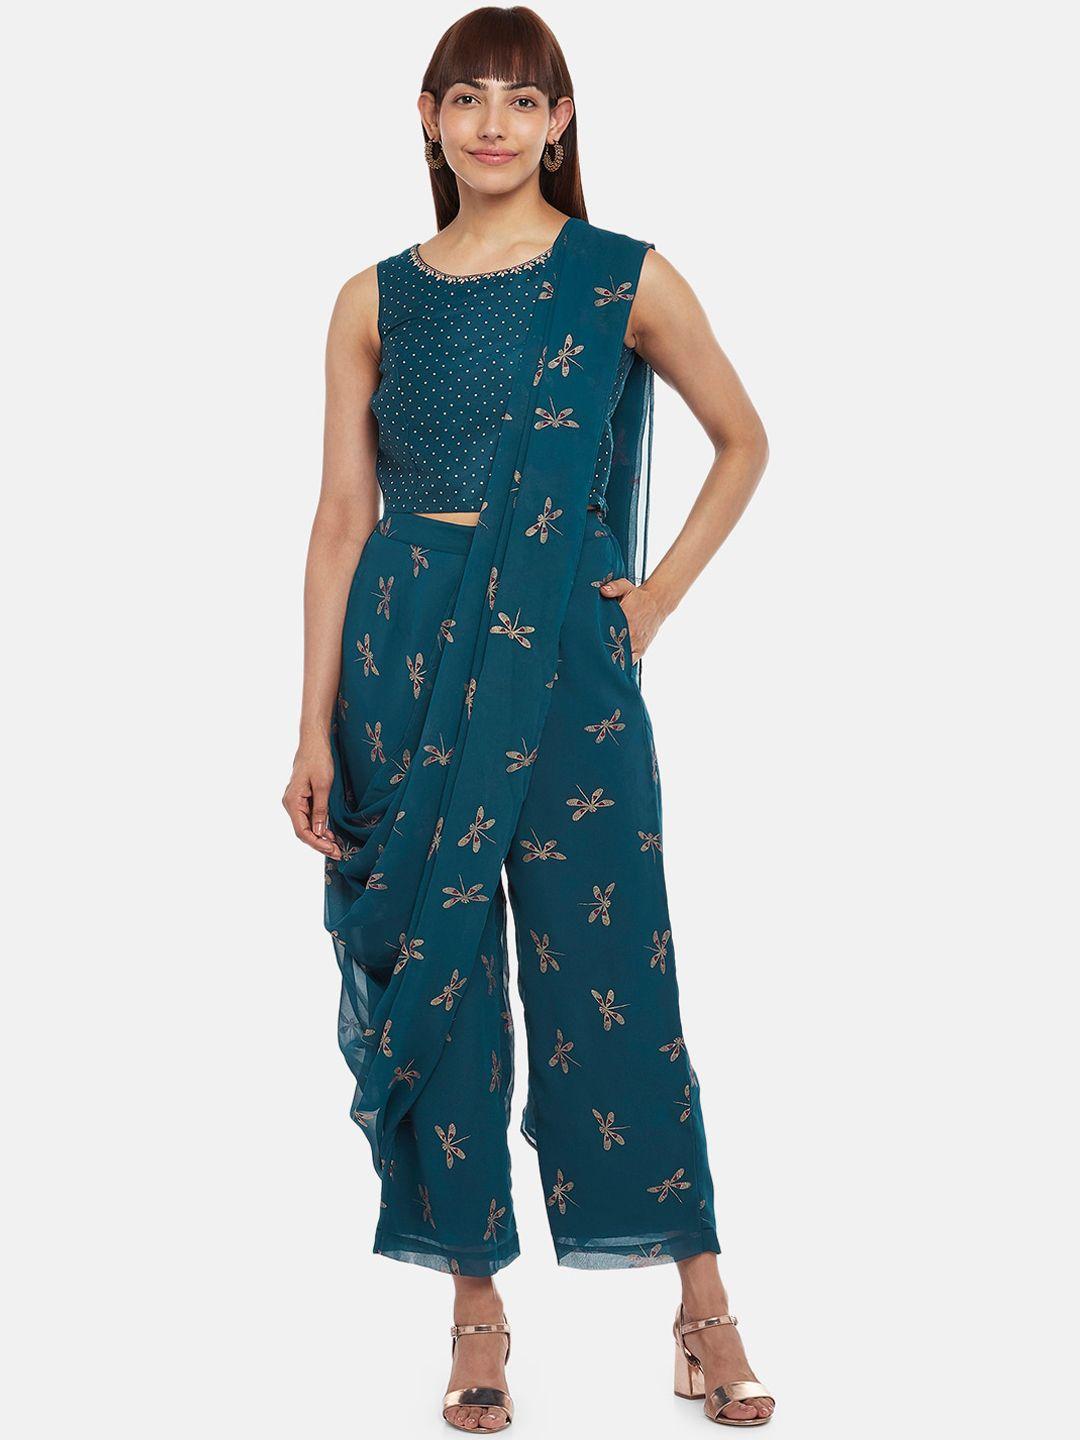 akkriti by pantaloons women ethnic motifs printed top with trousers & with dupatta